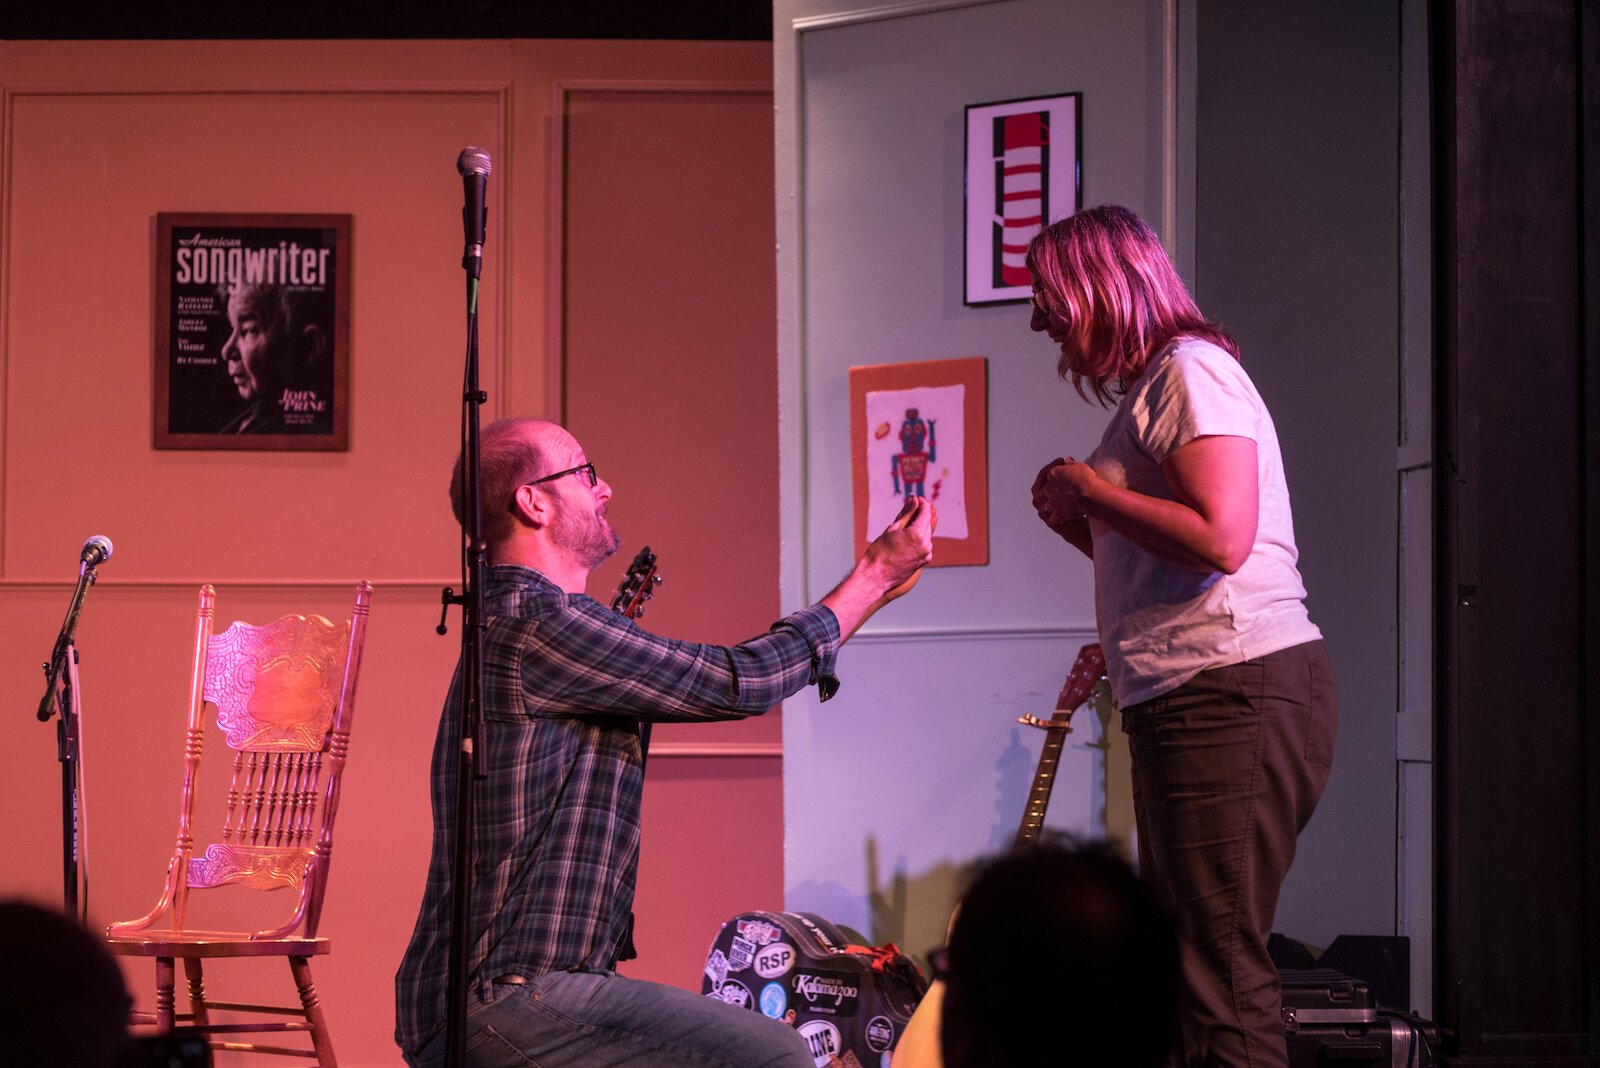 Who knows what will happen at Whatzit Hour? In August, musician Rod Cone proposed to Casey Claussen on stage.